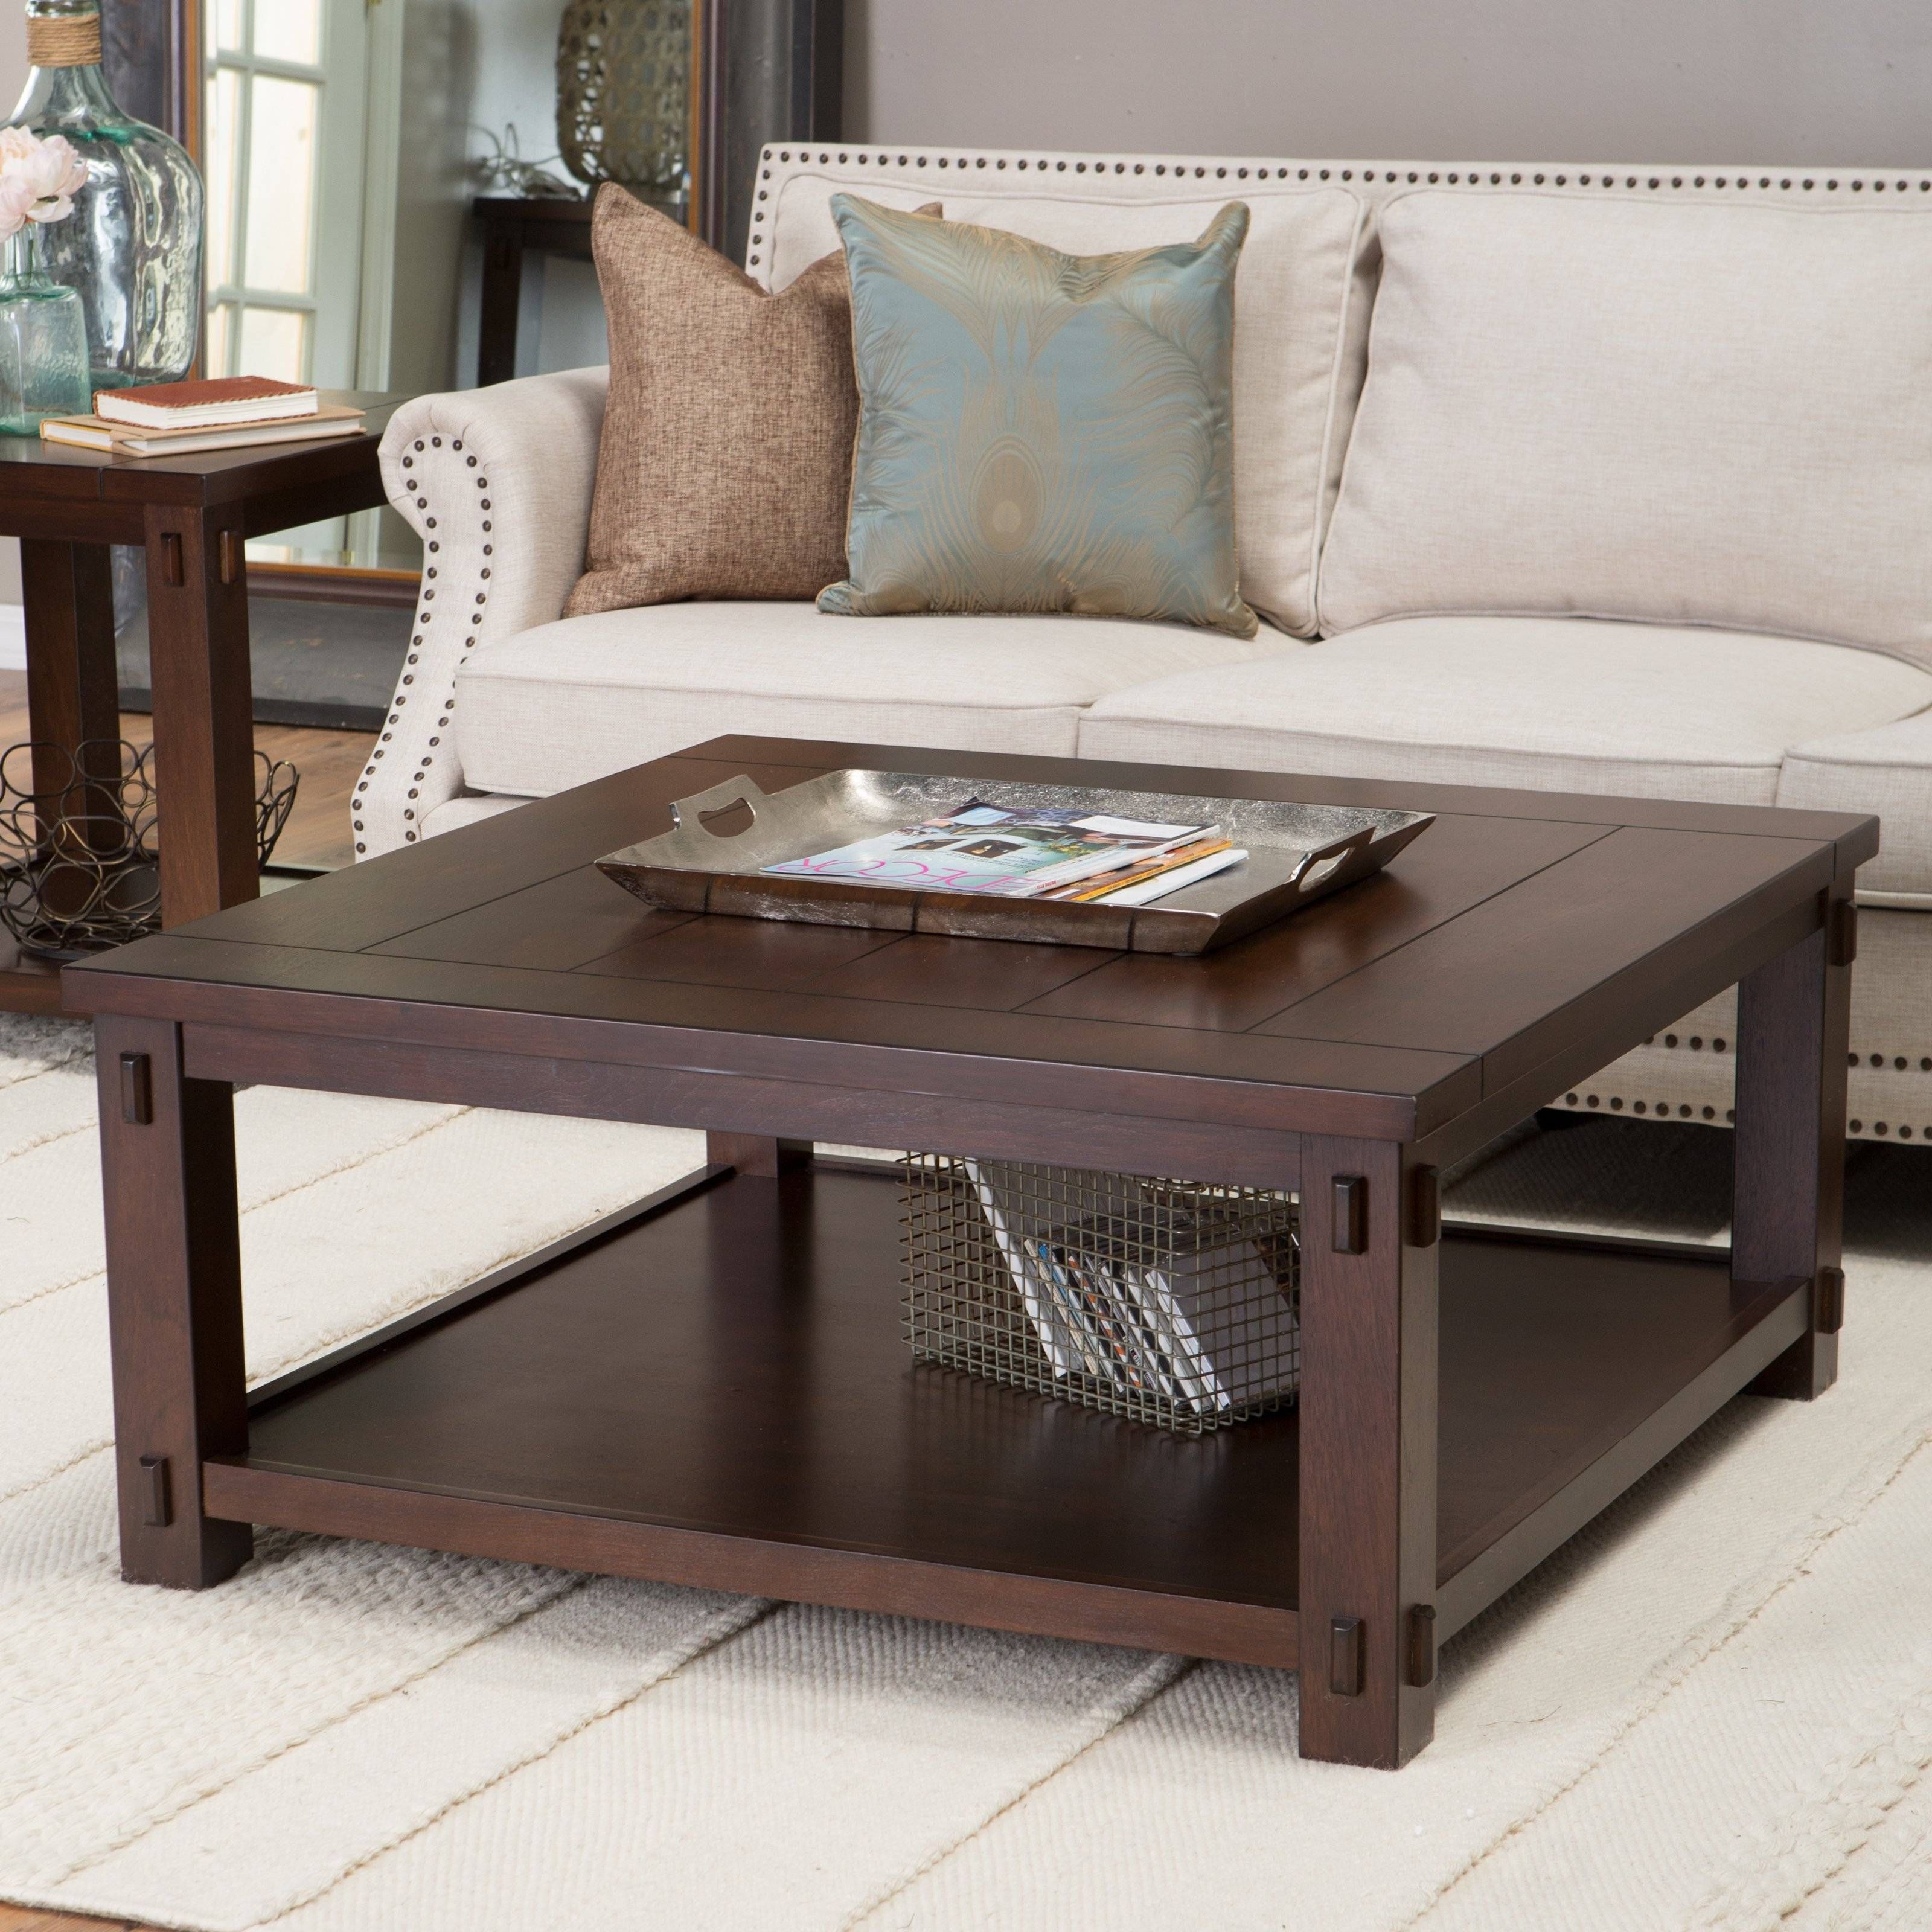 Avorio Faux Travertine Square Coffee Table | Hayneedle In Square Coffee Tables (Photo 7 of 30)